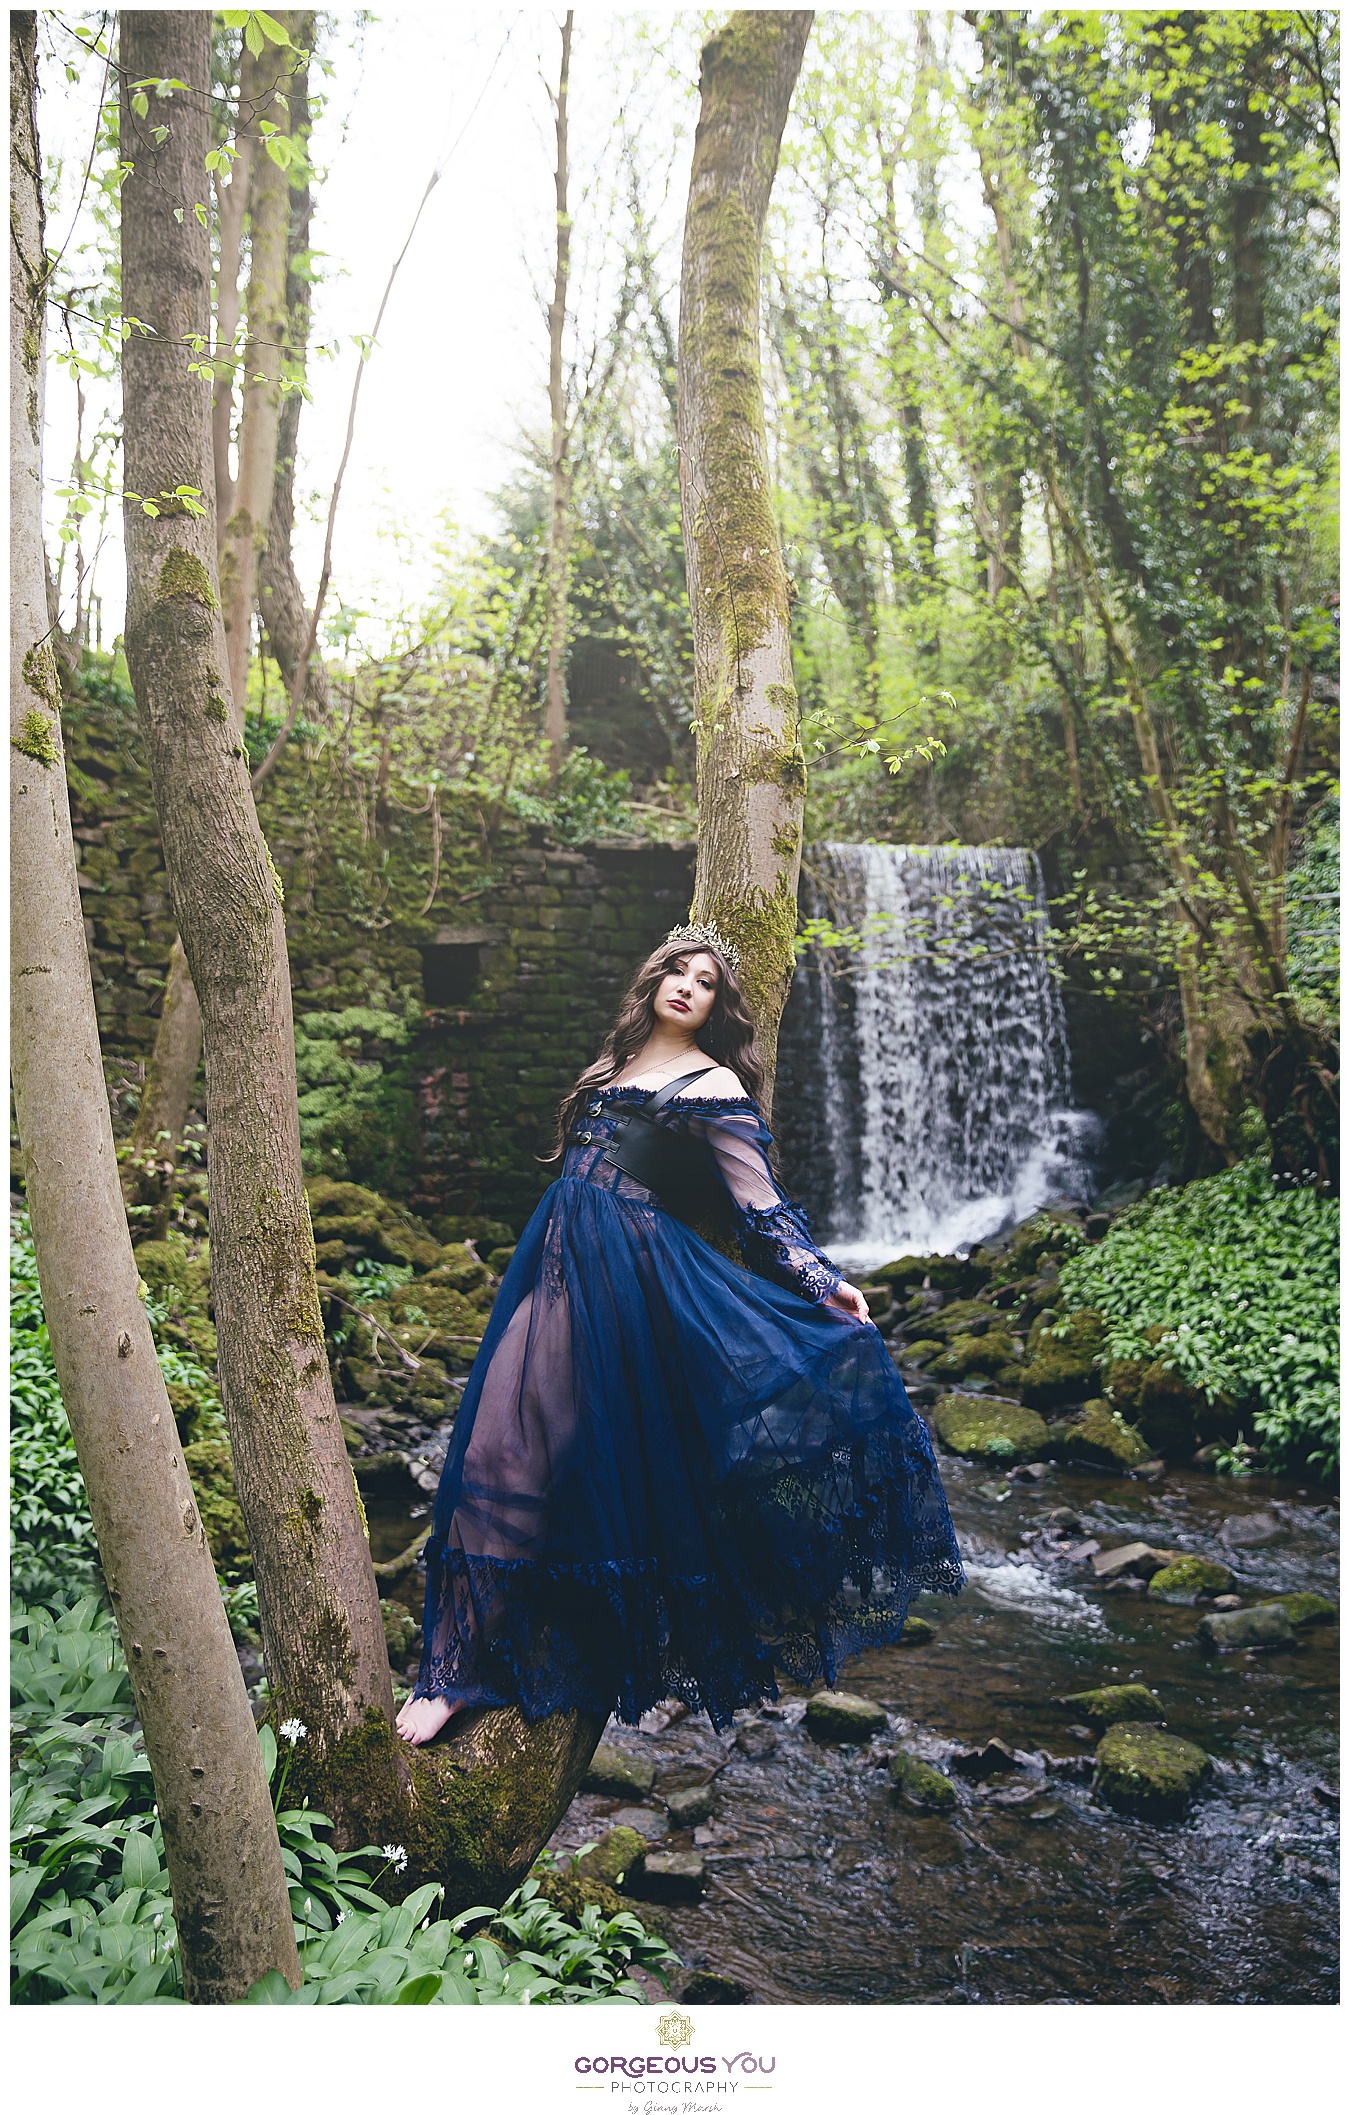 Navy tulle dress with black bodice, wearing a crown in front of a waterfall | Divine feminine goddess boudoir photoshoot | Gorgeous You Photography | North Yorkshire